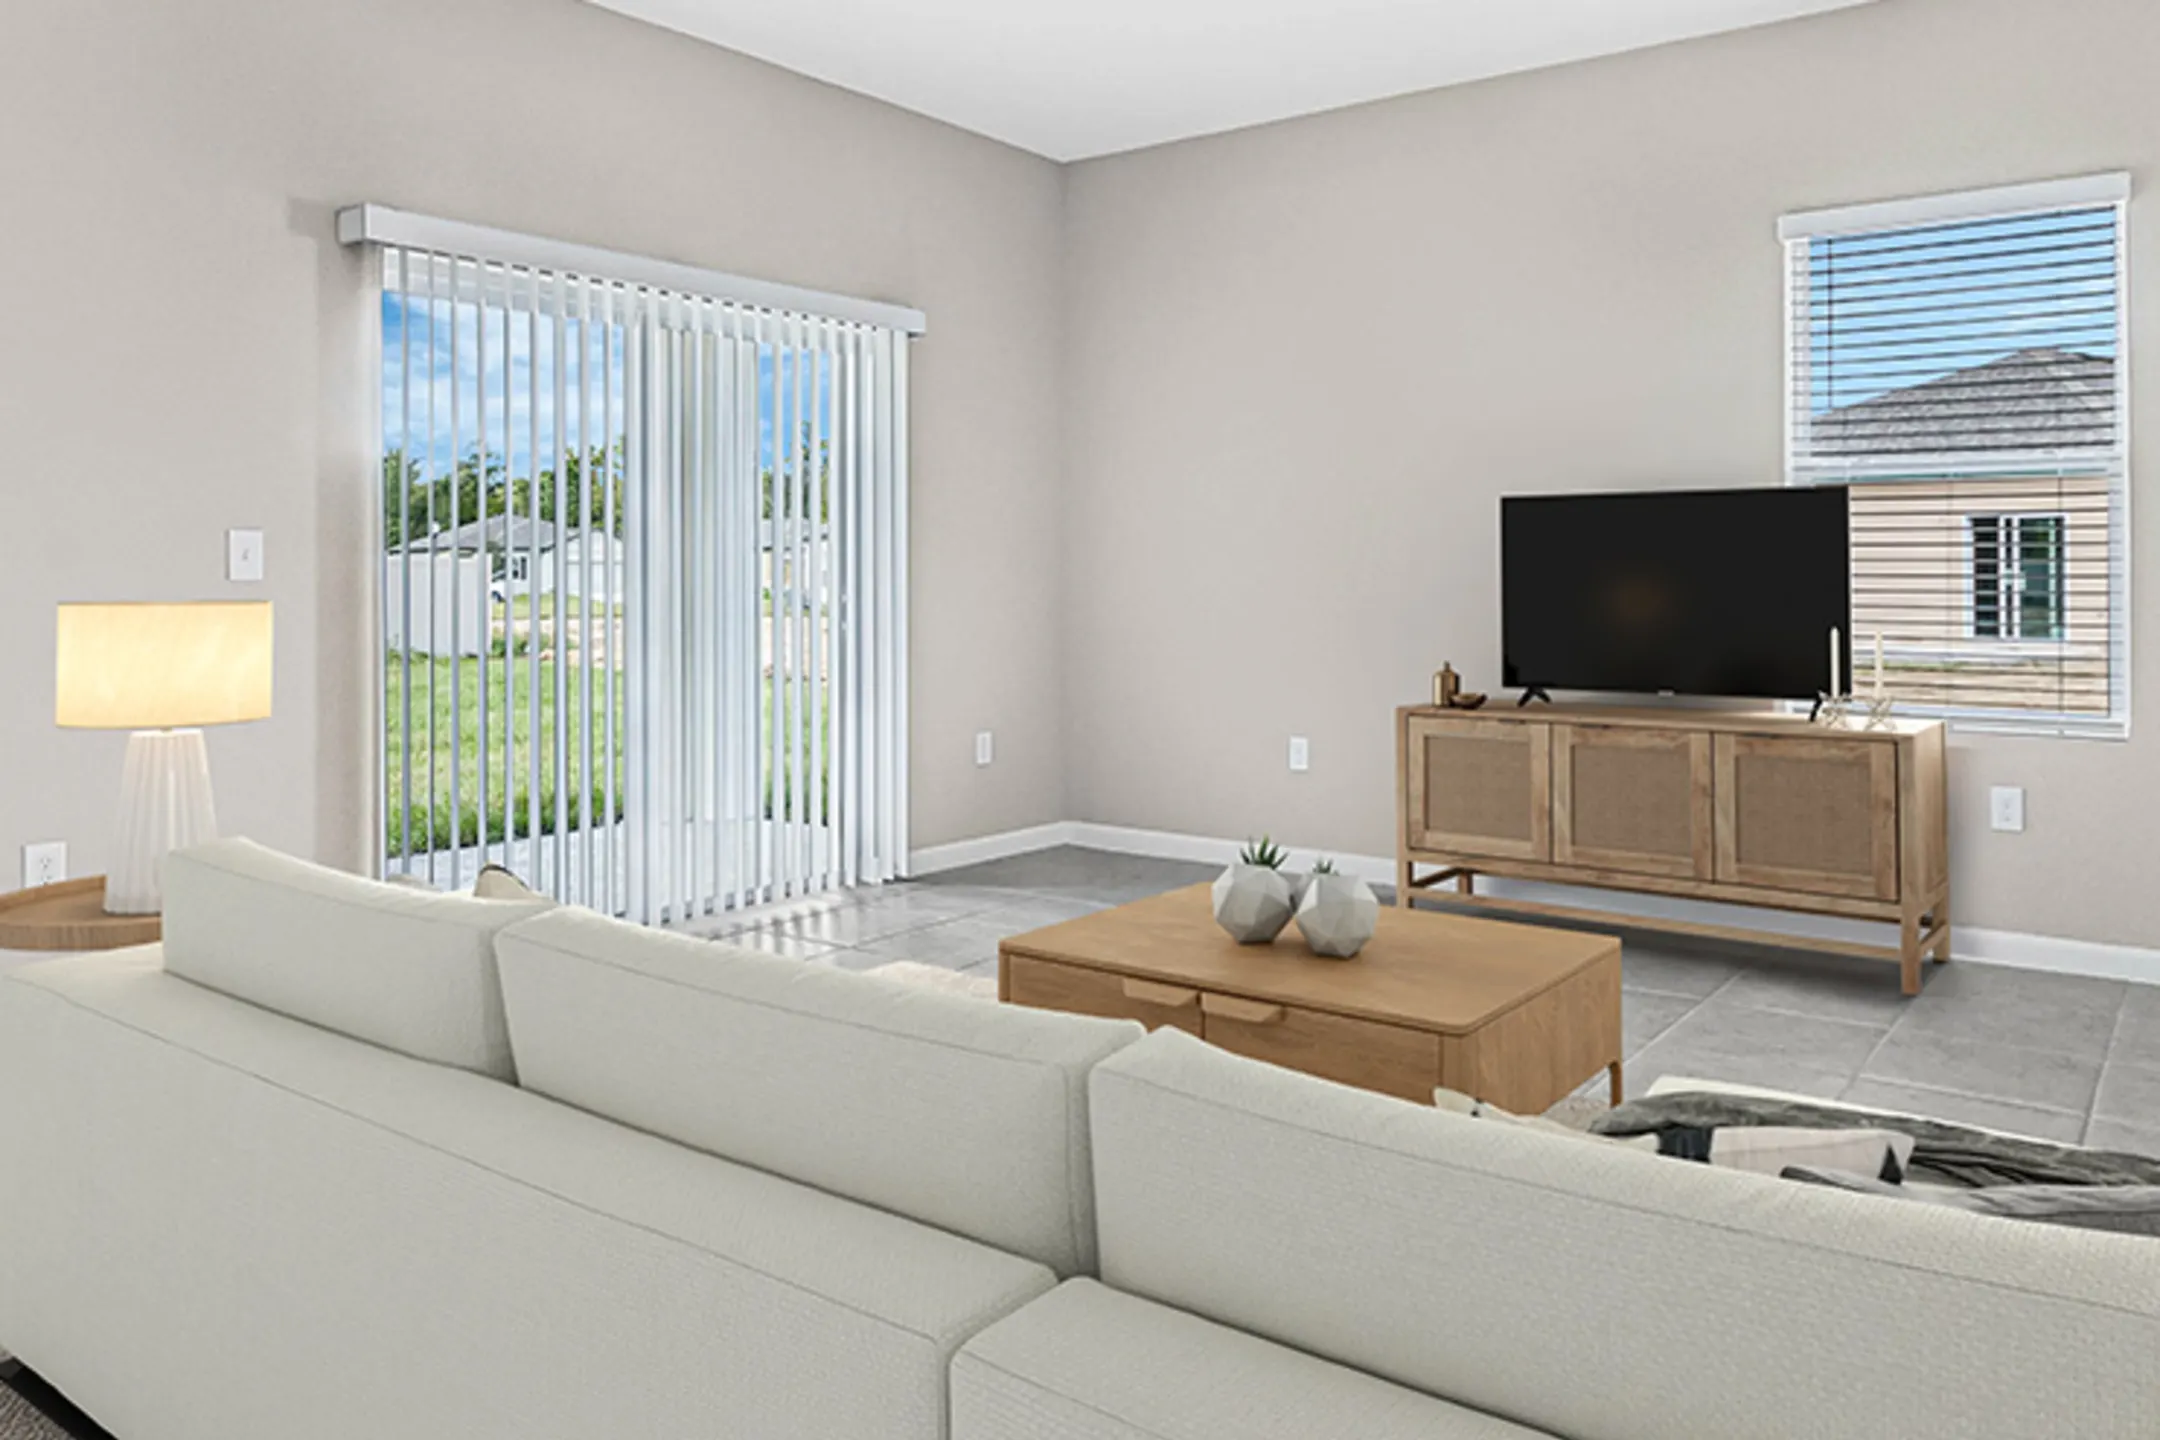 Living Room - The Nexus at Overbrook - Kissimmee, FL